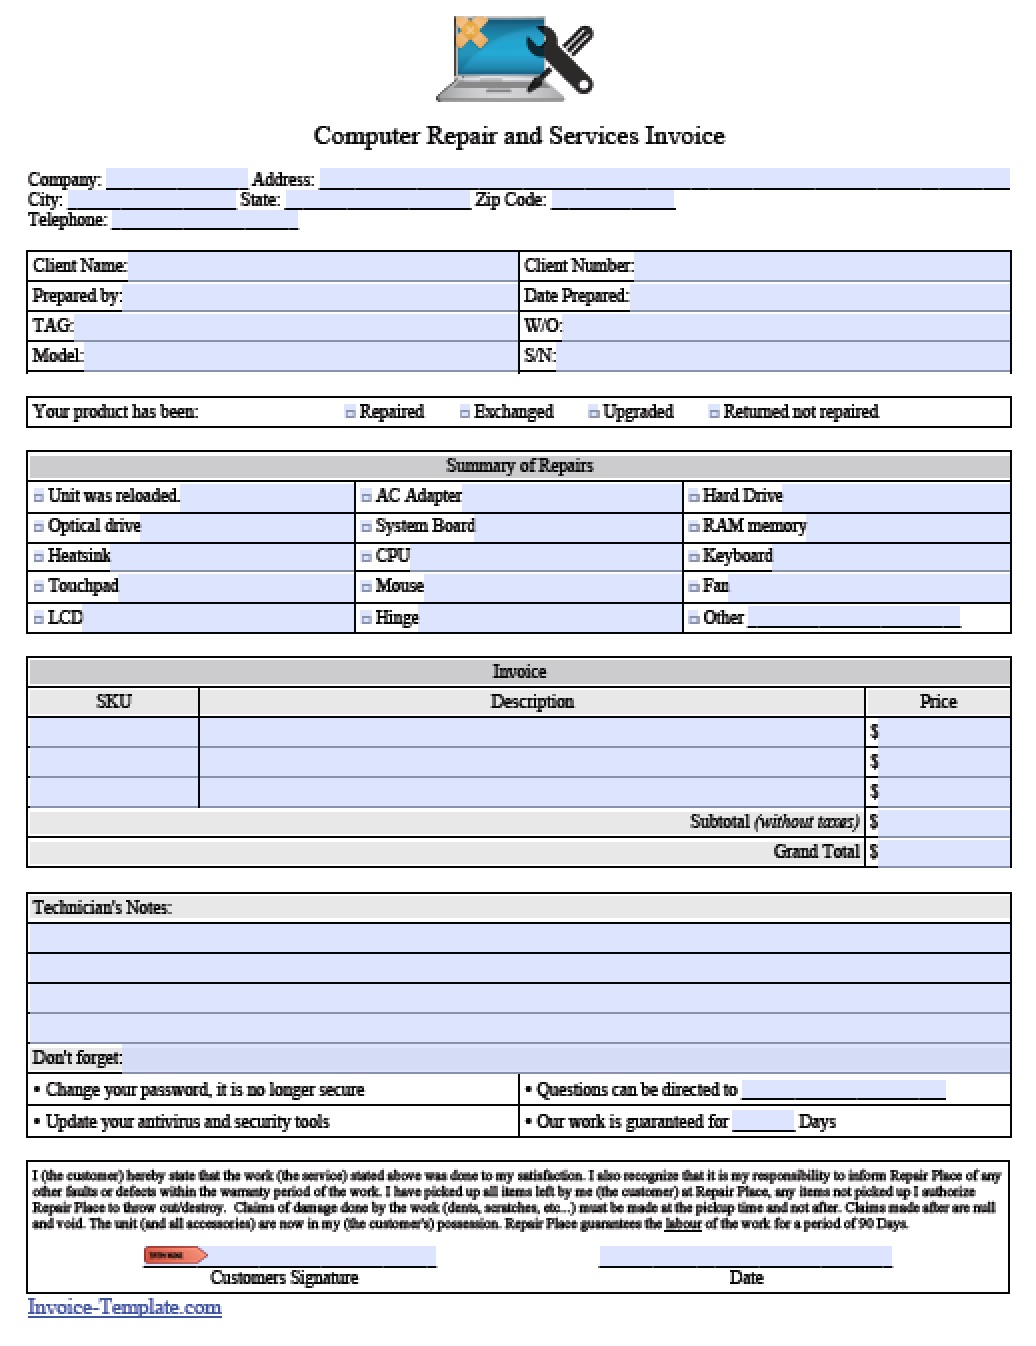 Computer Repair Form Template charlotte clergy coalition